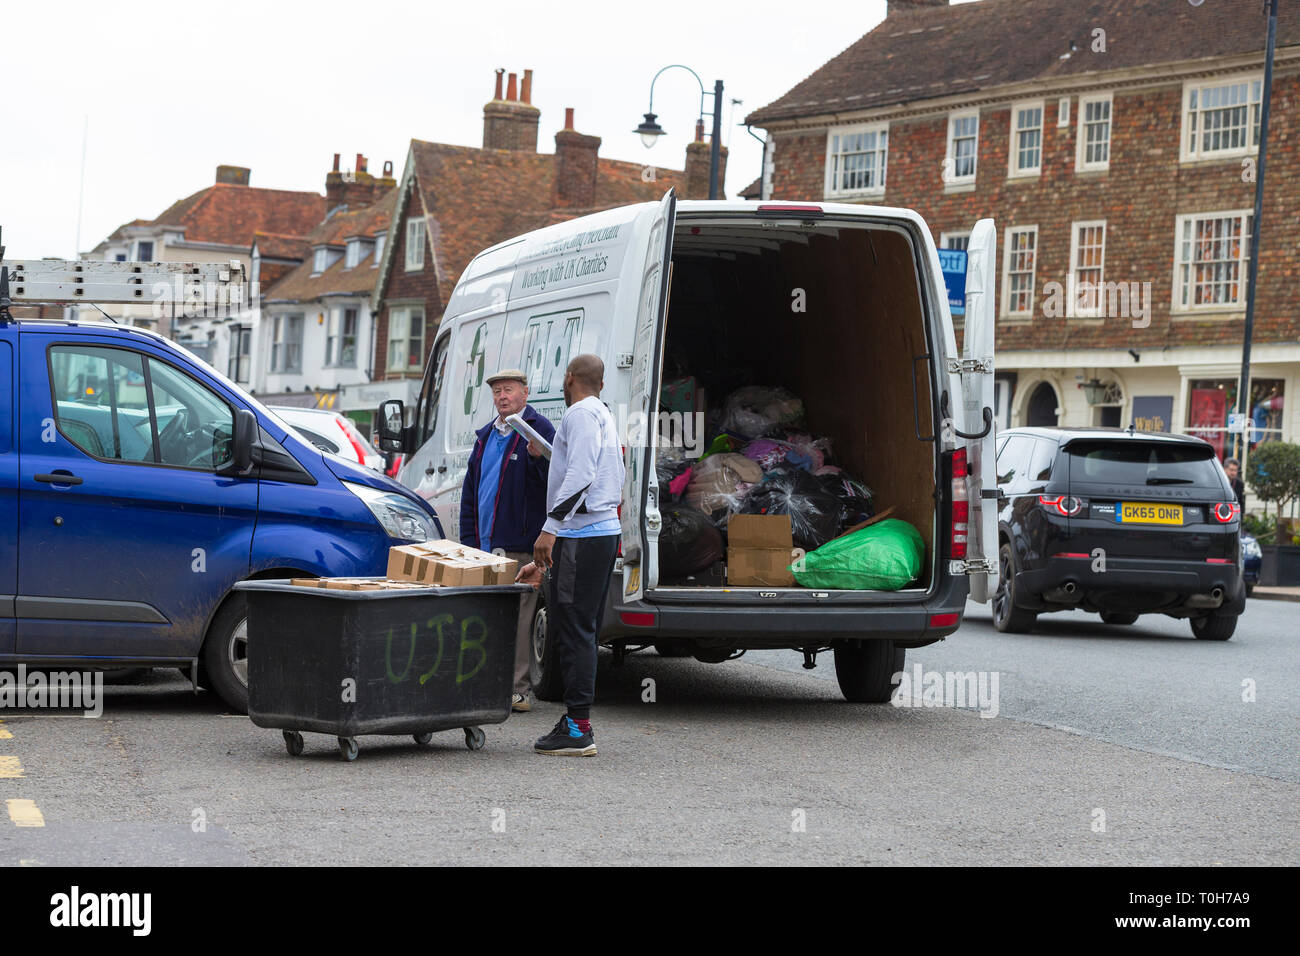 Remnants recycling van with driver and trolley, uk Stock Photo